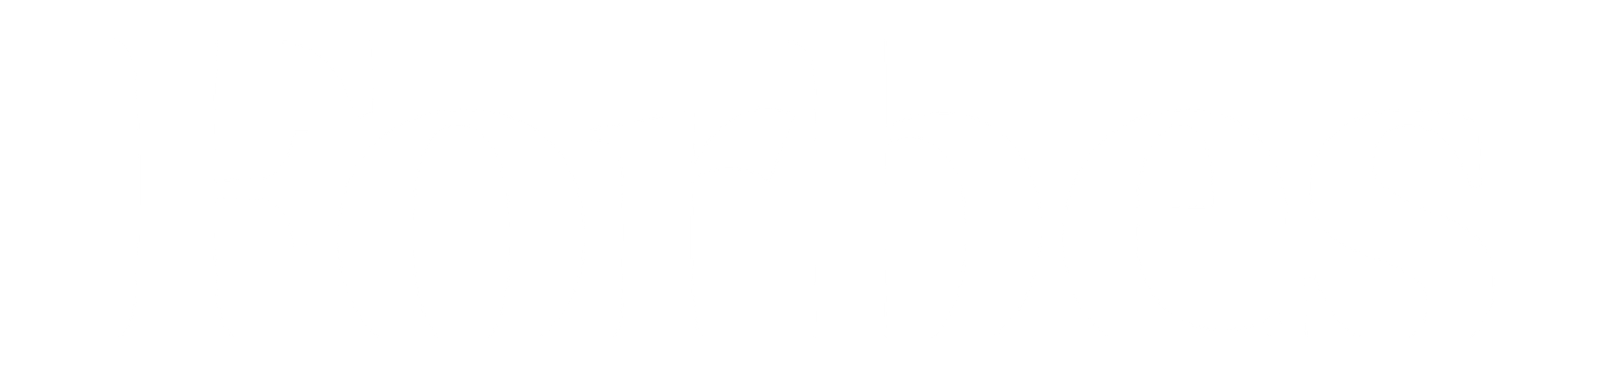 Forbes icon logo png